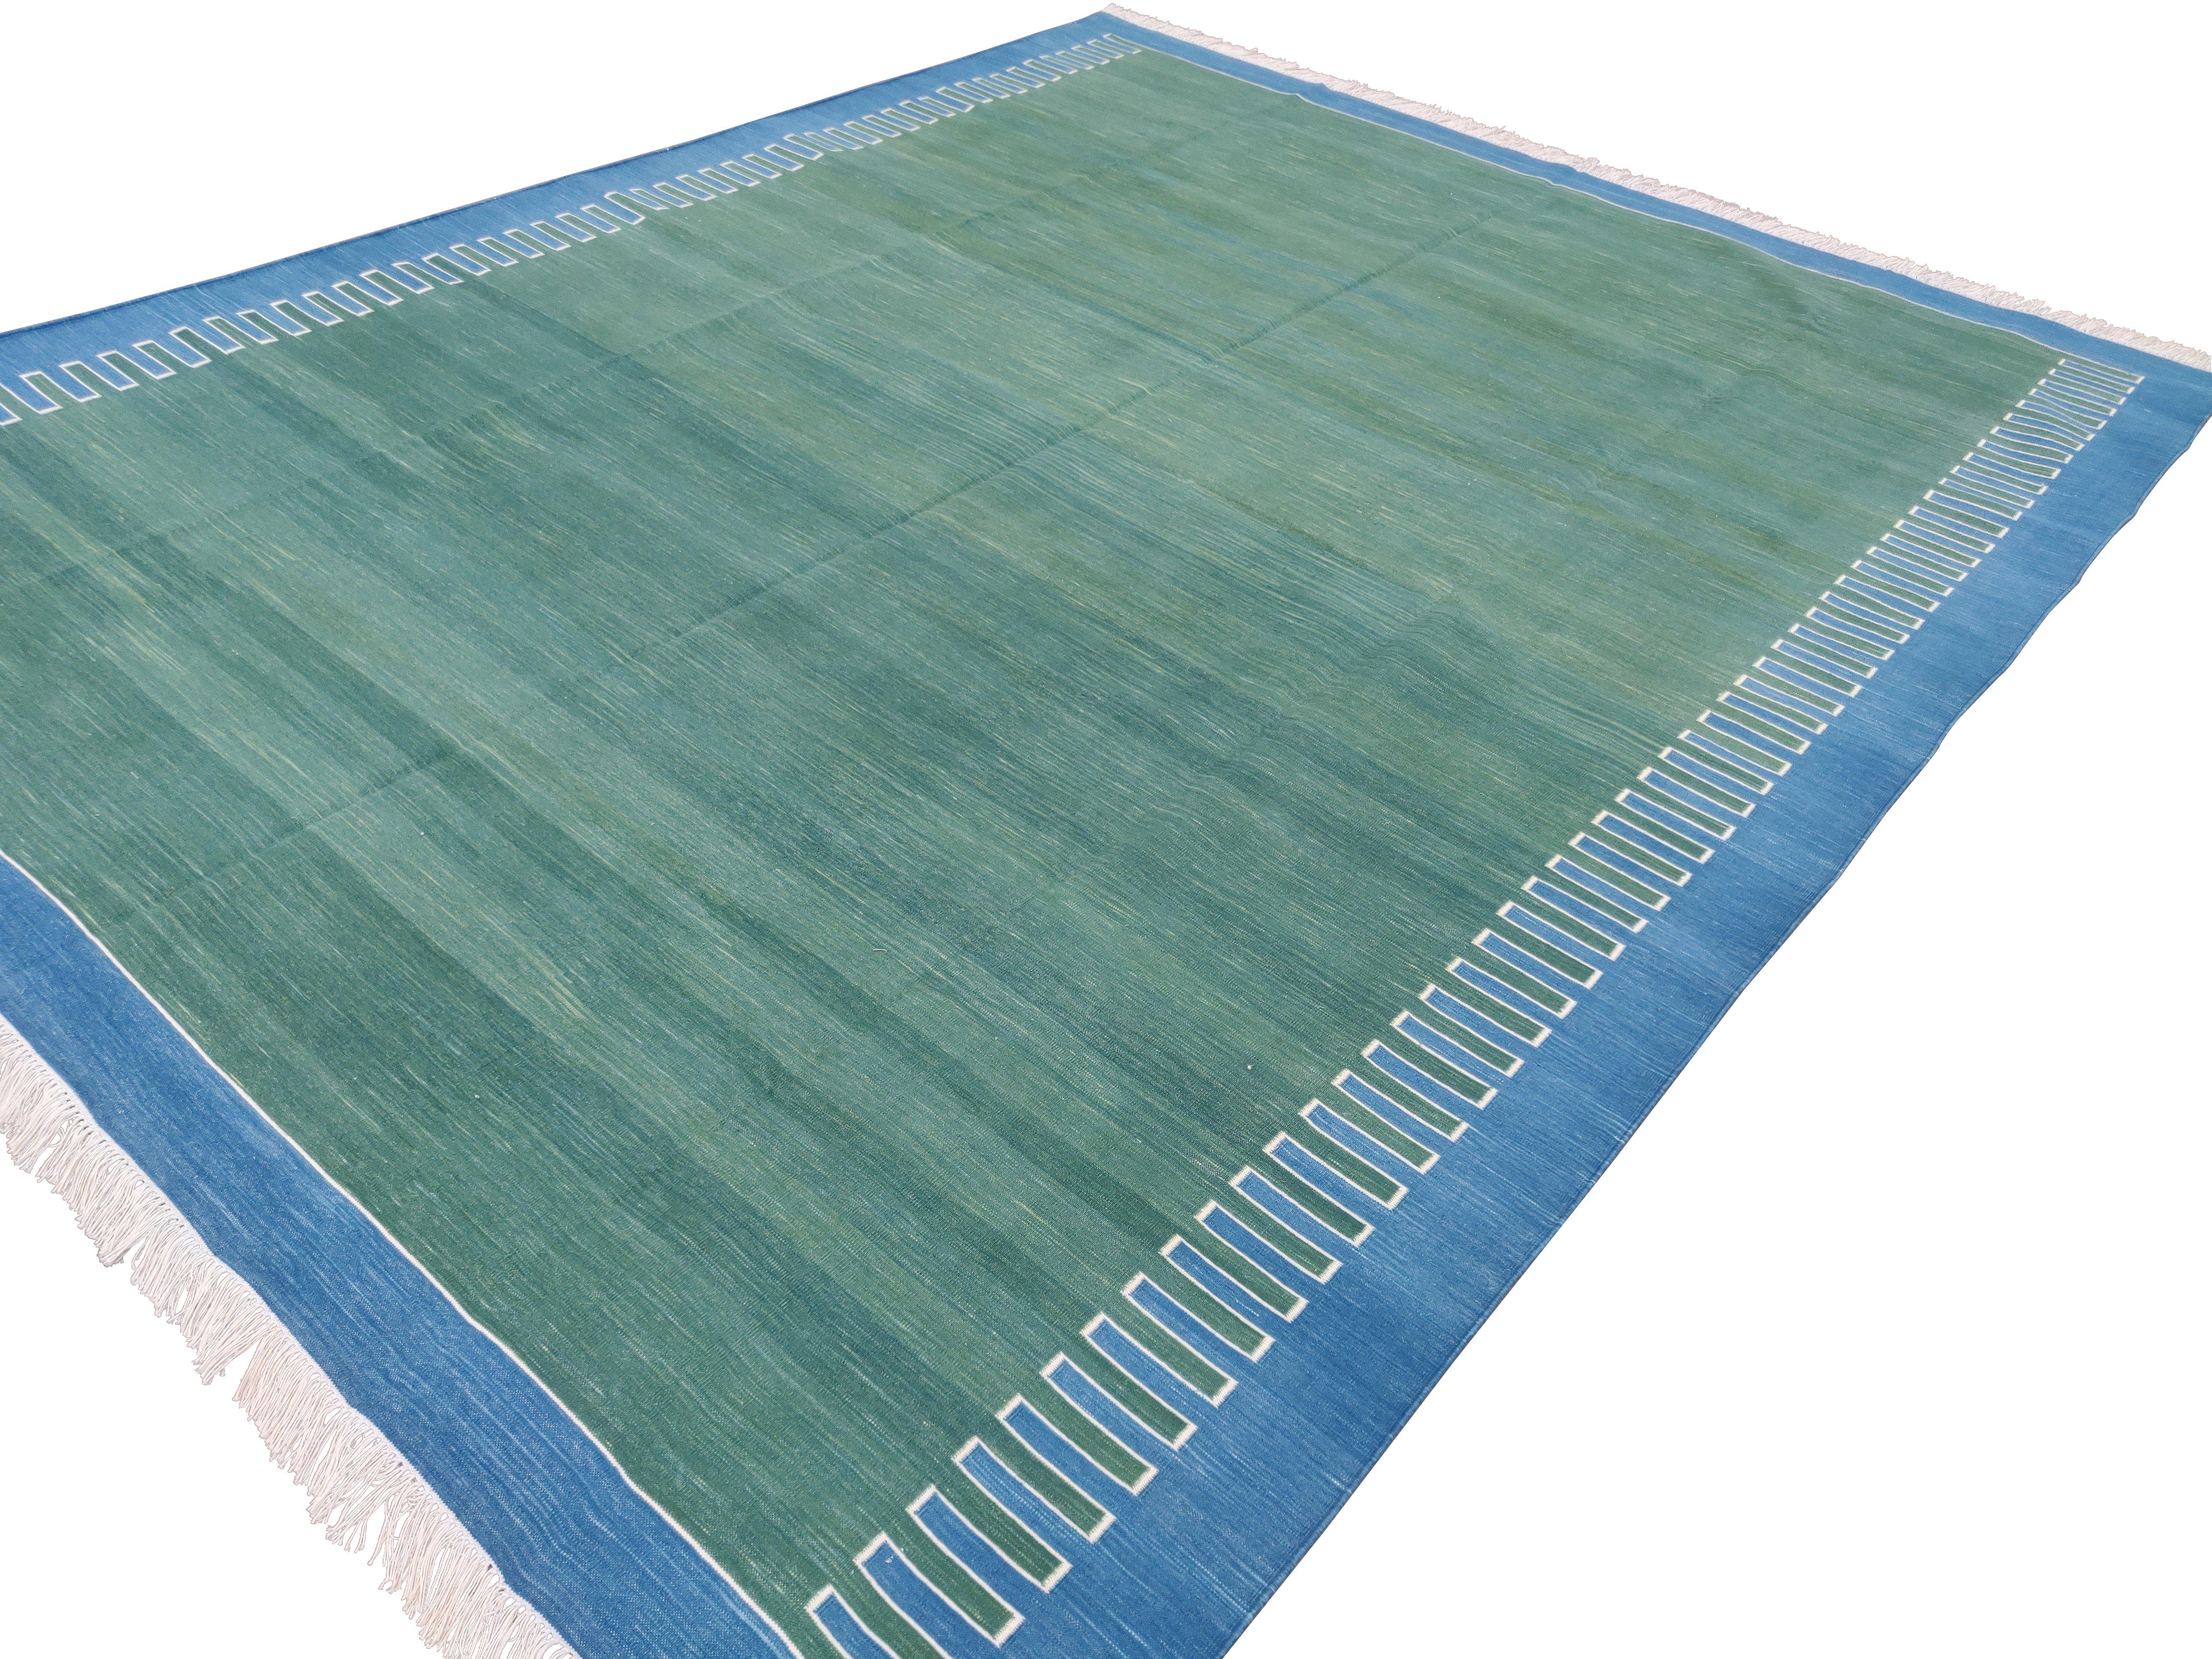 Contemporary Handmade Cotton Area Flat Weave Rug, 8x10 Green And Blue Zig Zag Striped Dhurrie For Sale